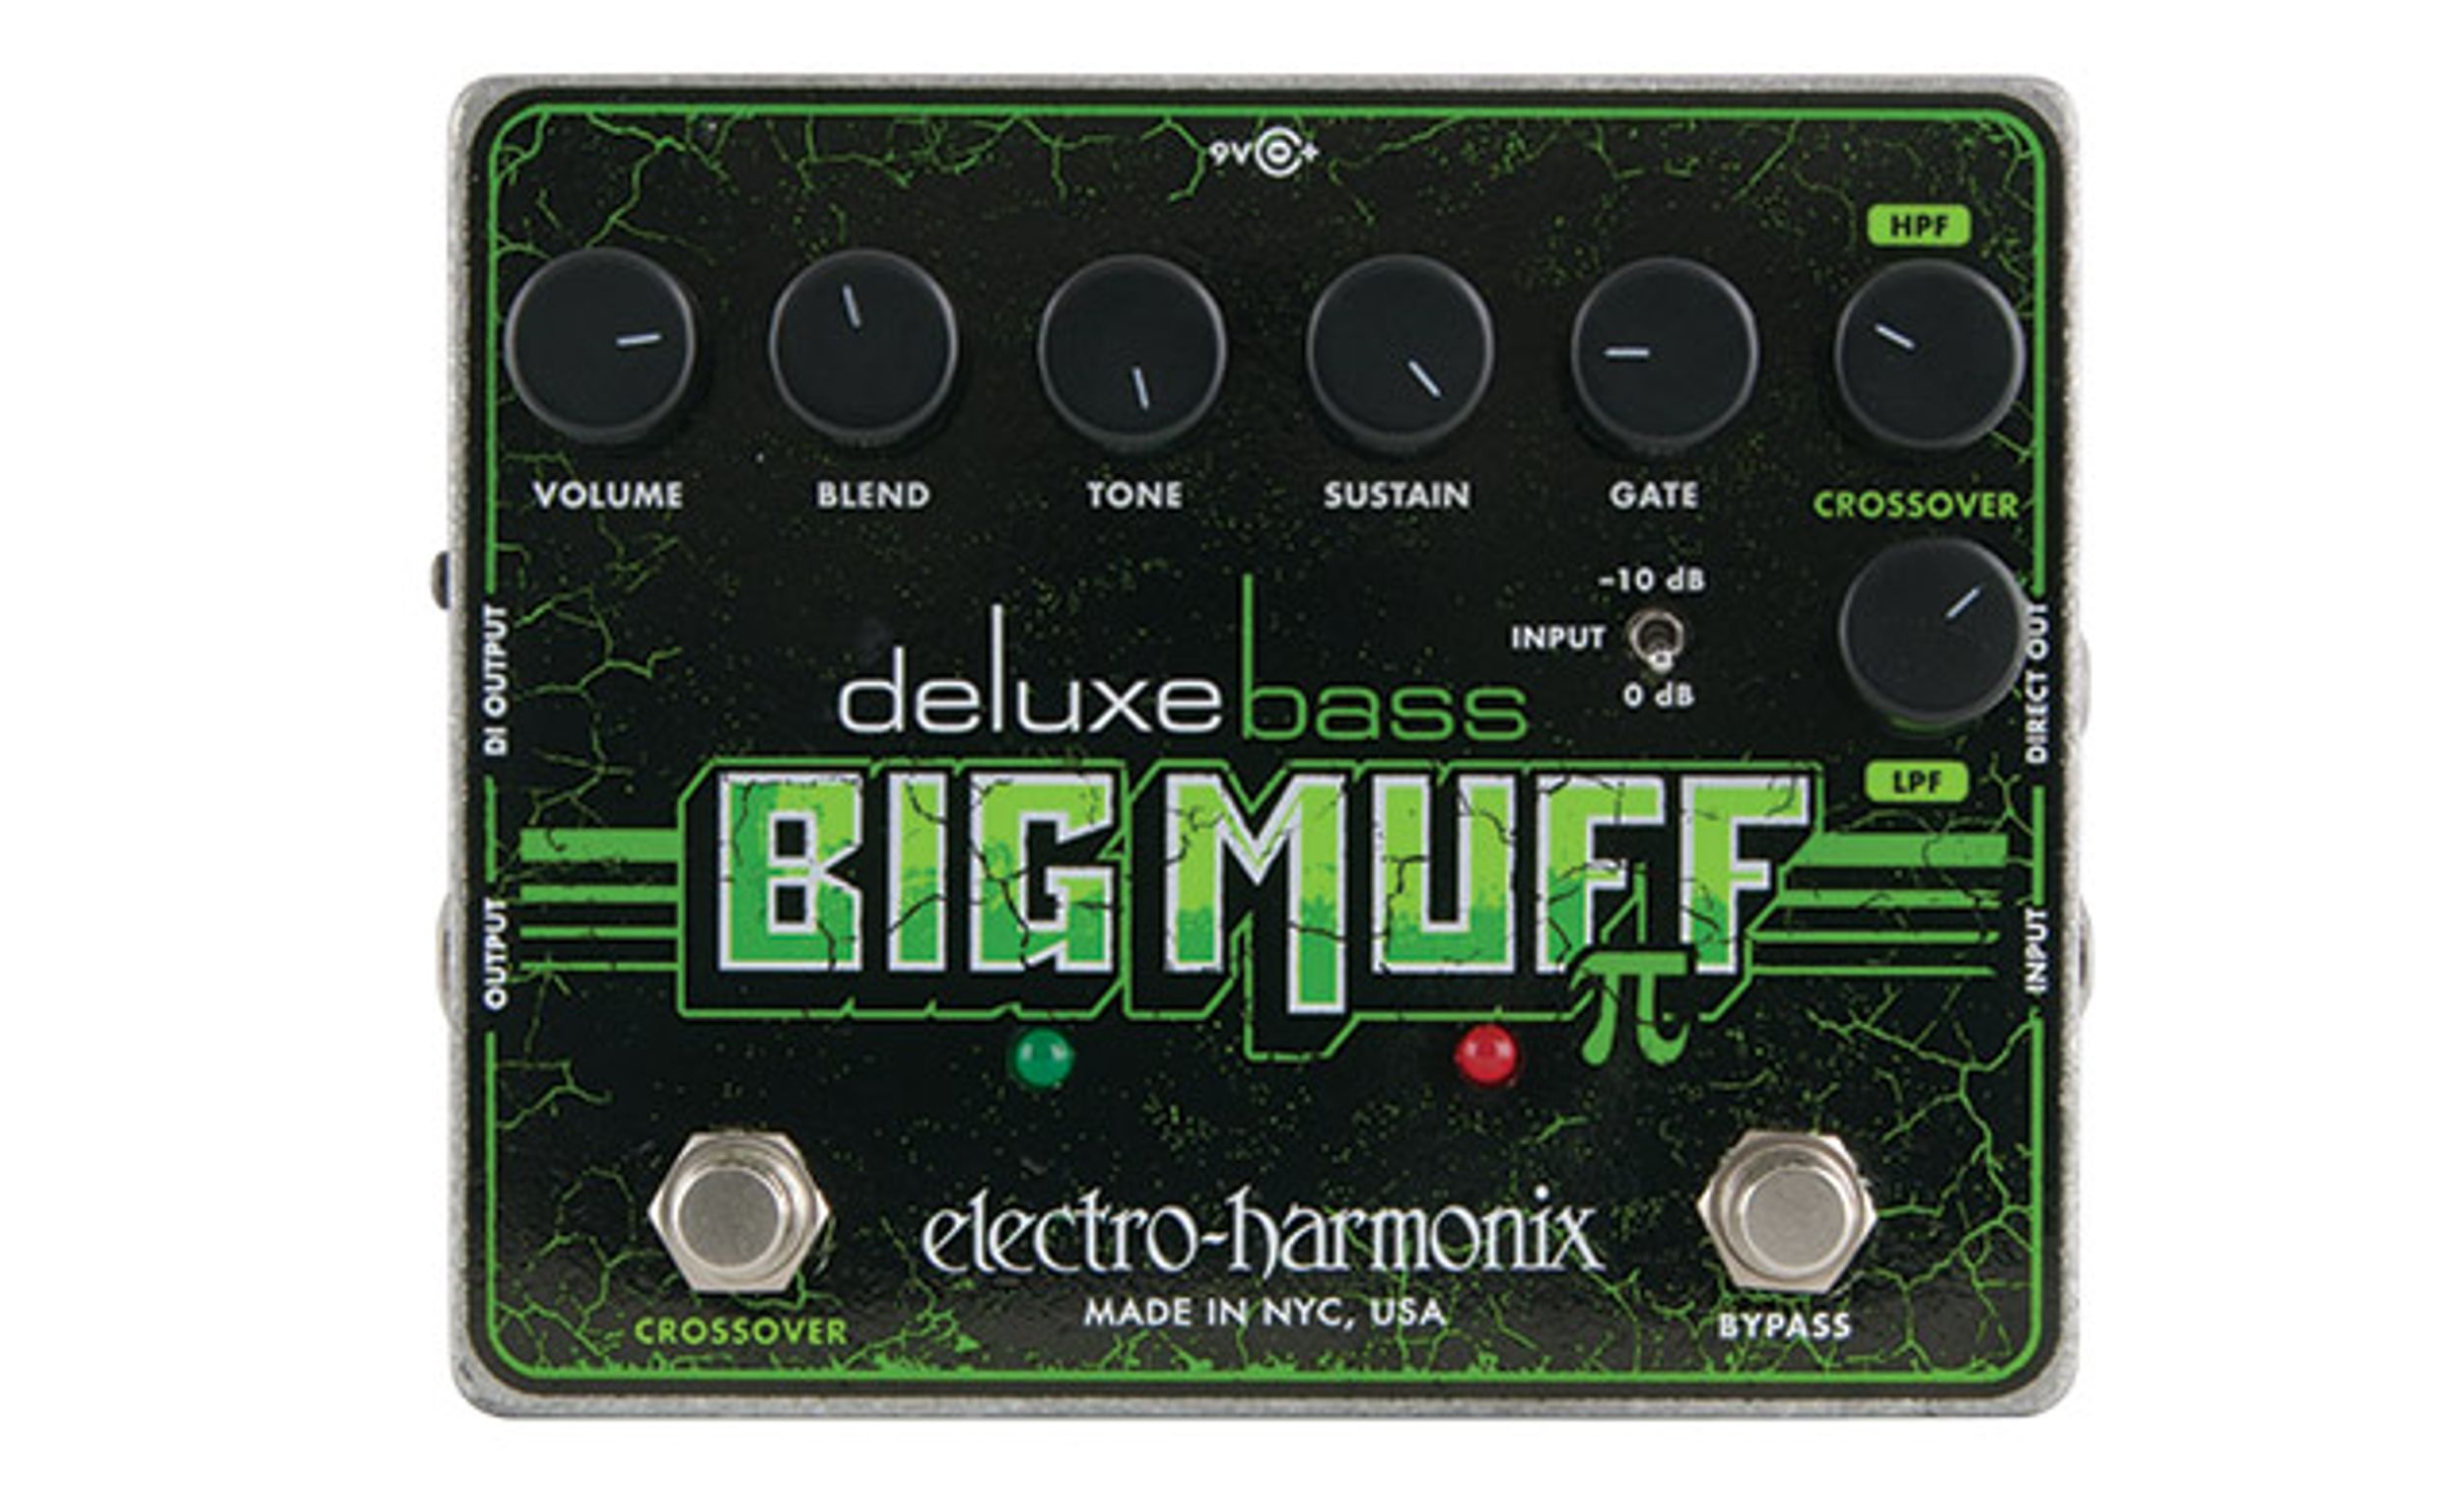 Electro-Harmonix Deluxe Bass Big Muff Pi Pedal Review